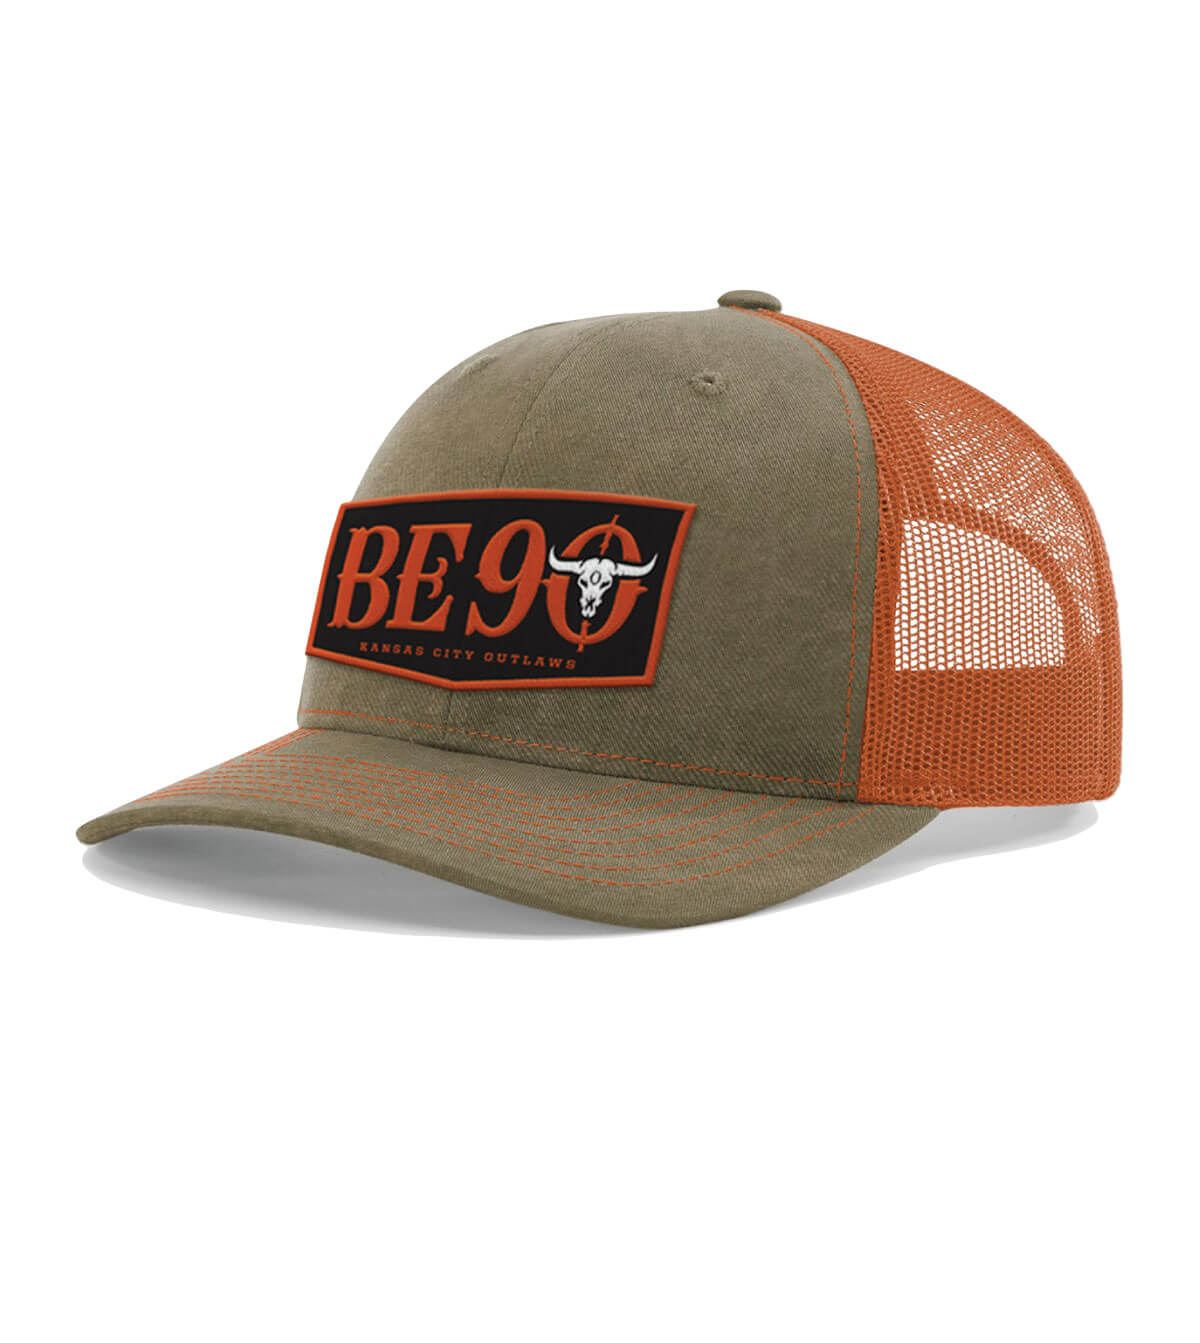 Front view of the "Be 90" Limited Trucker Cap